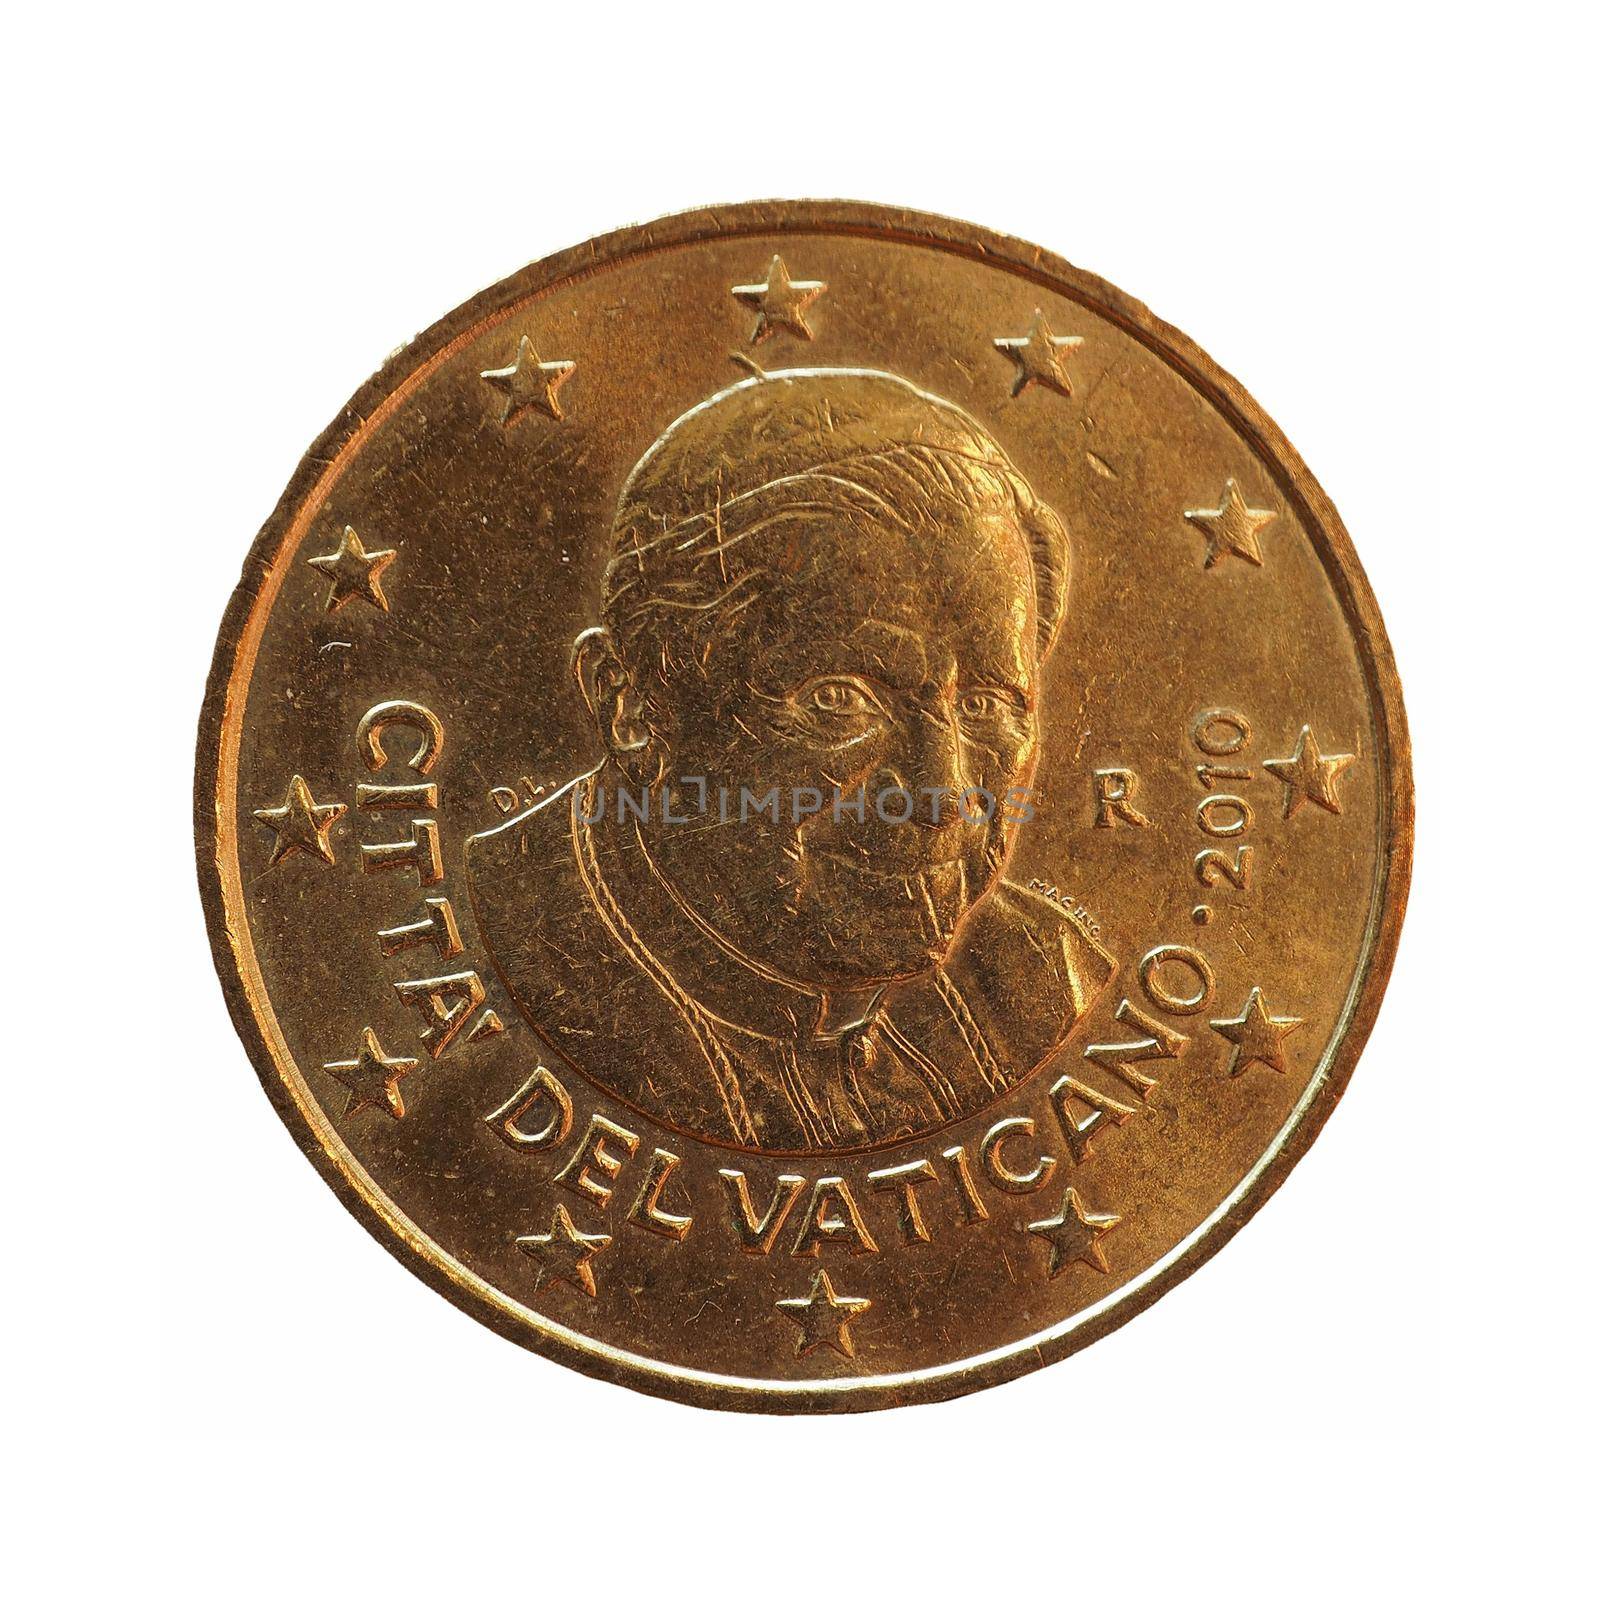 50 cents coin money (EUR), currency of European Union isolated over white background